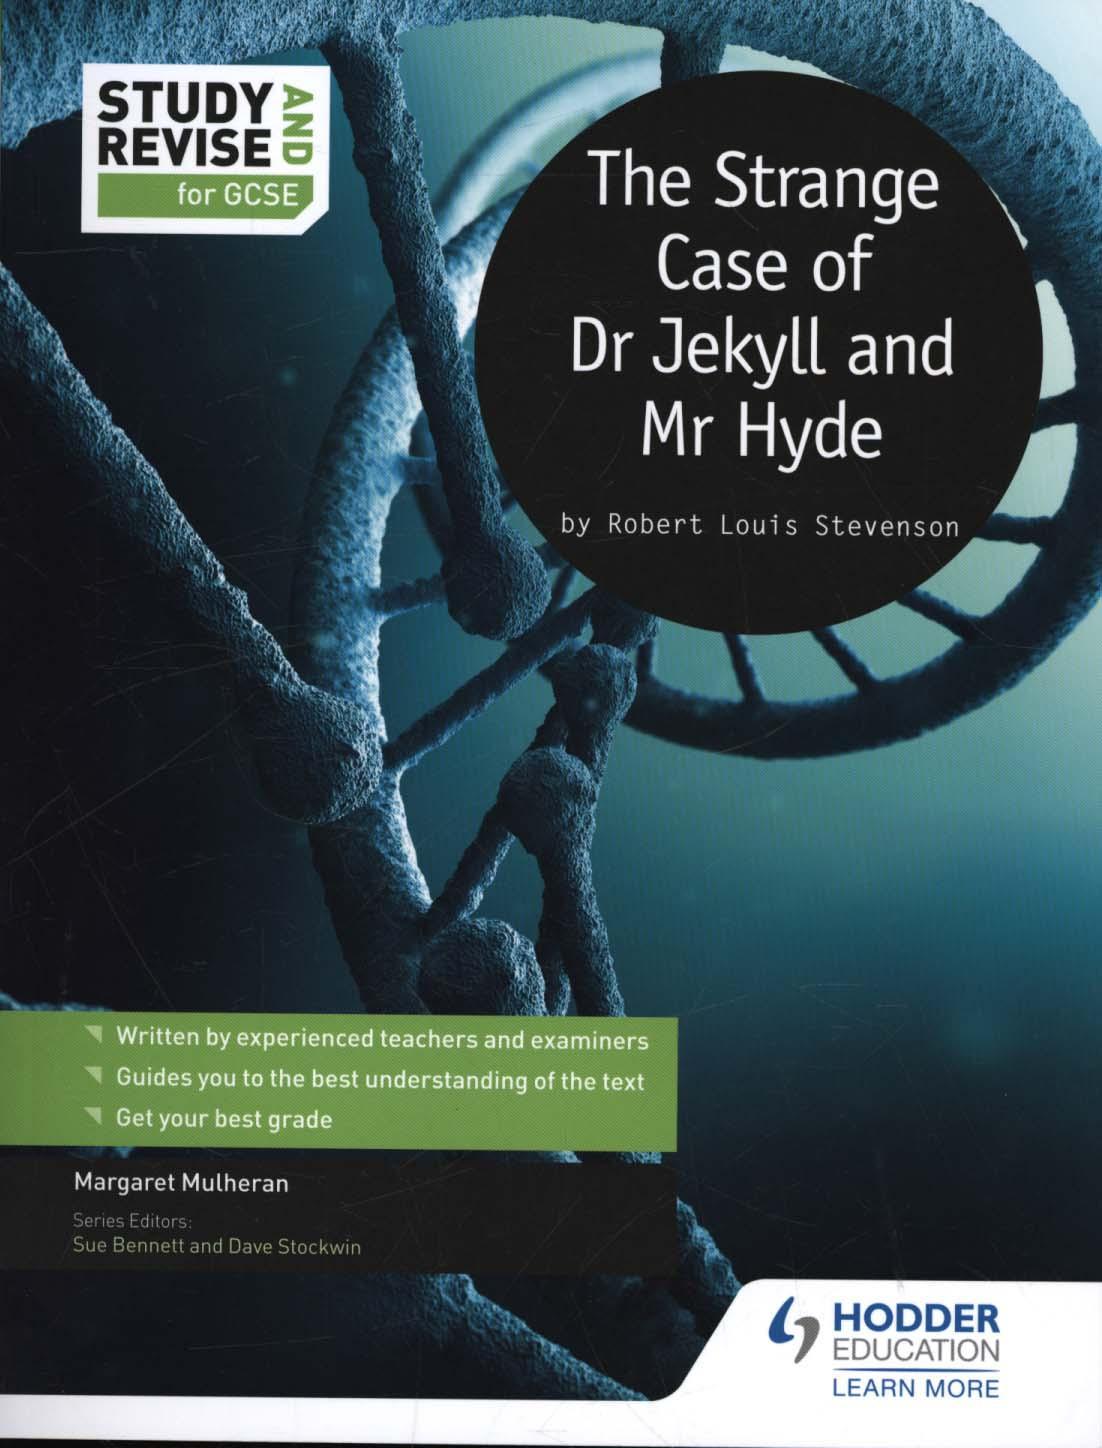 Study and Revise: The Strange Case of Dr Jekyll and Mr Hyde